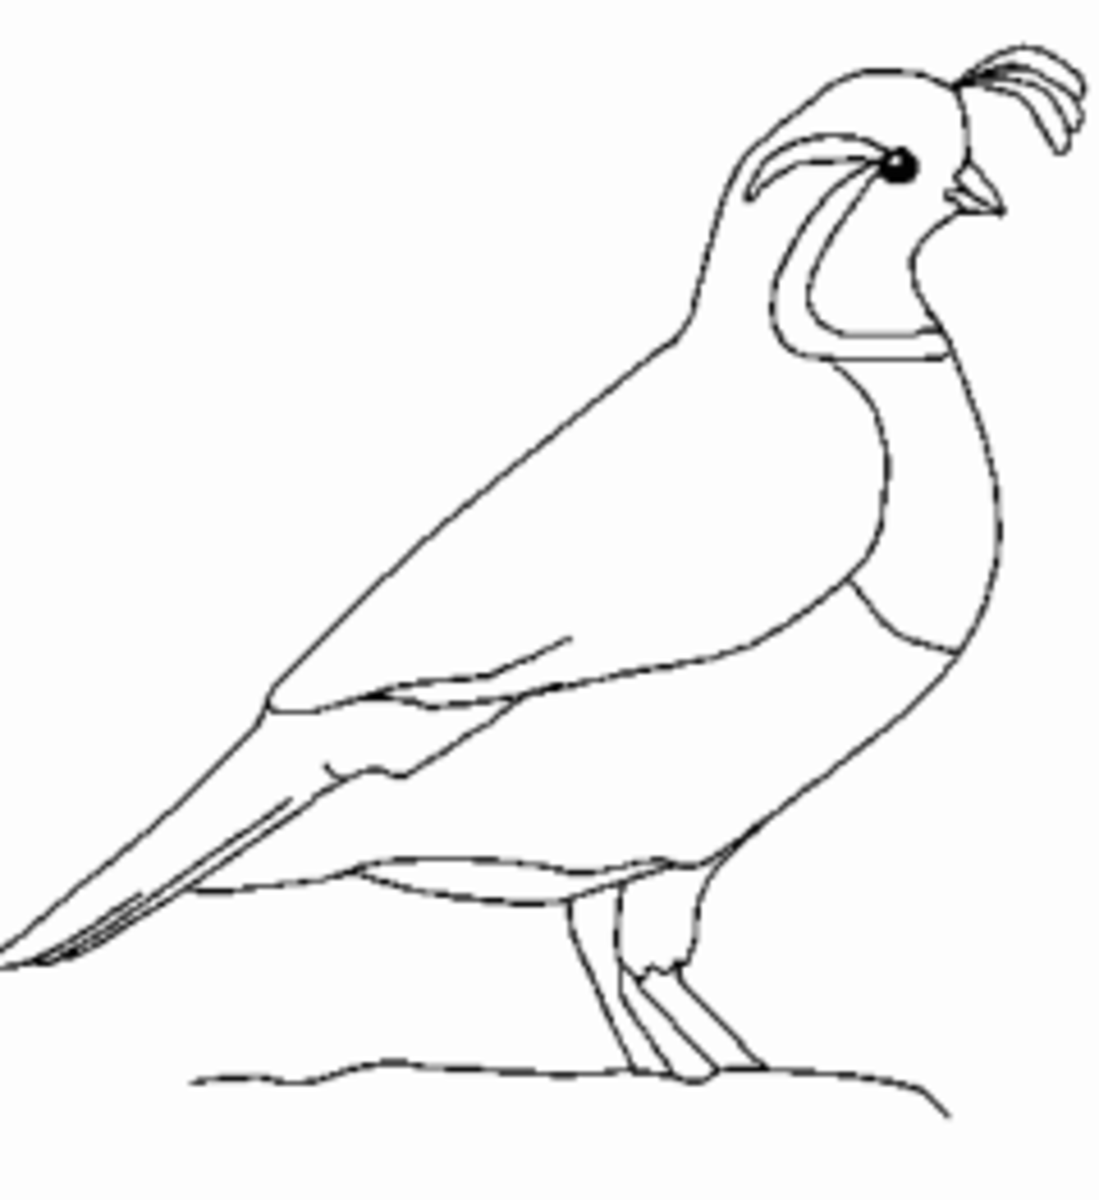 Free Online Pictures of Birds to Color for Adults and Kids | hubpages